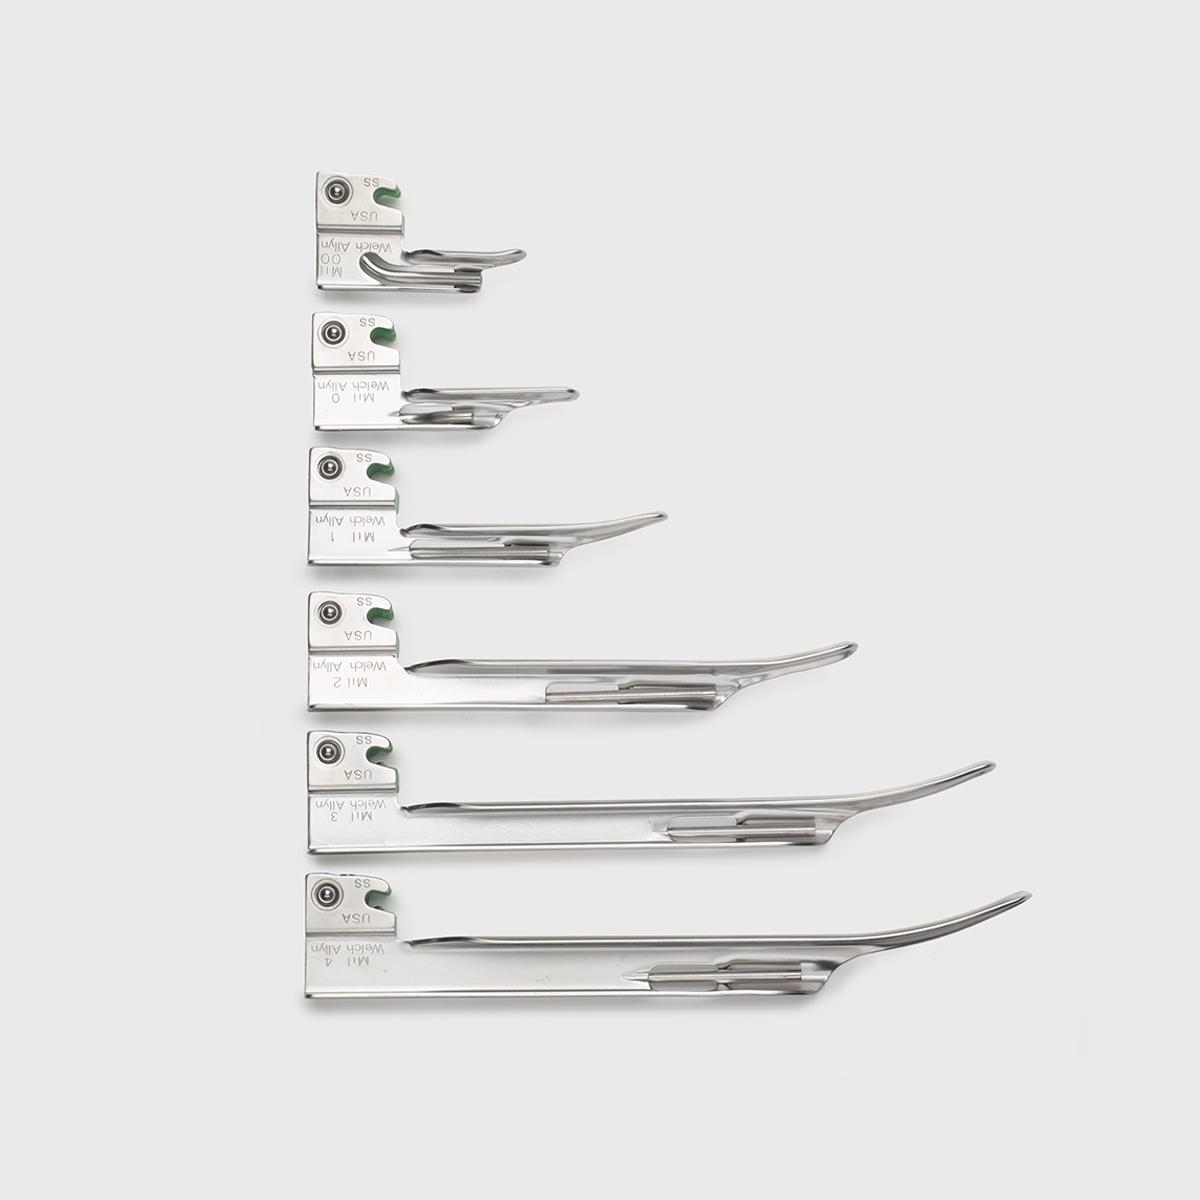 Six Welch Allyn Fibre-Optic Laryngoscope System Miller blades of various size.